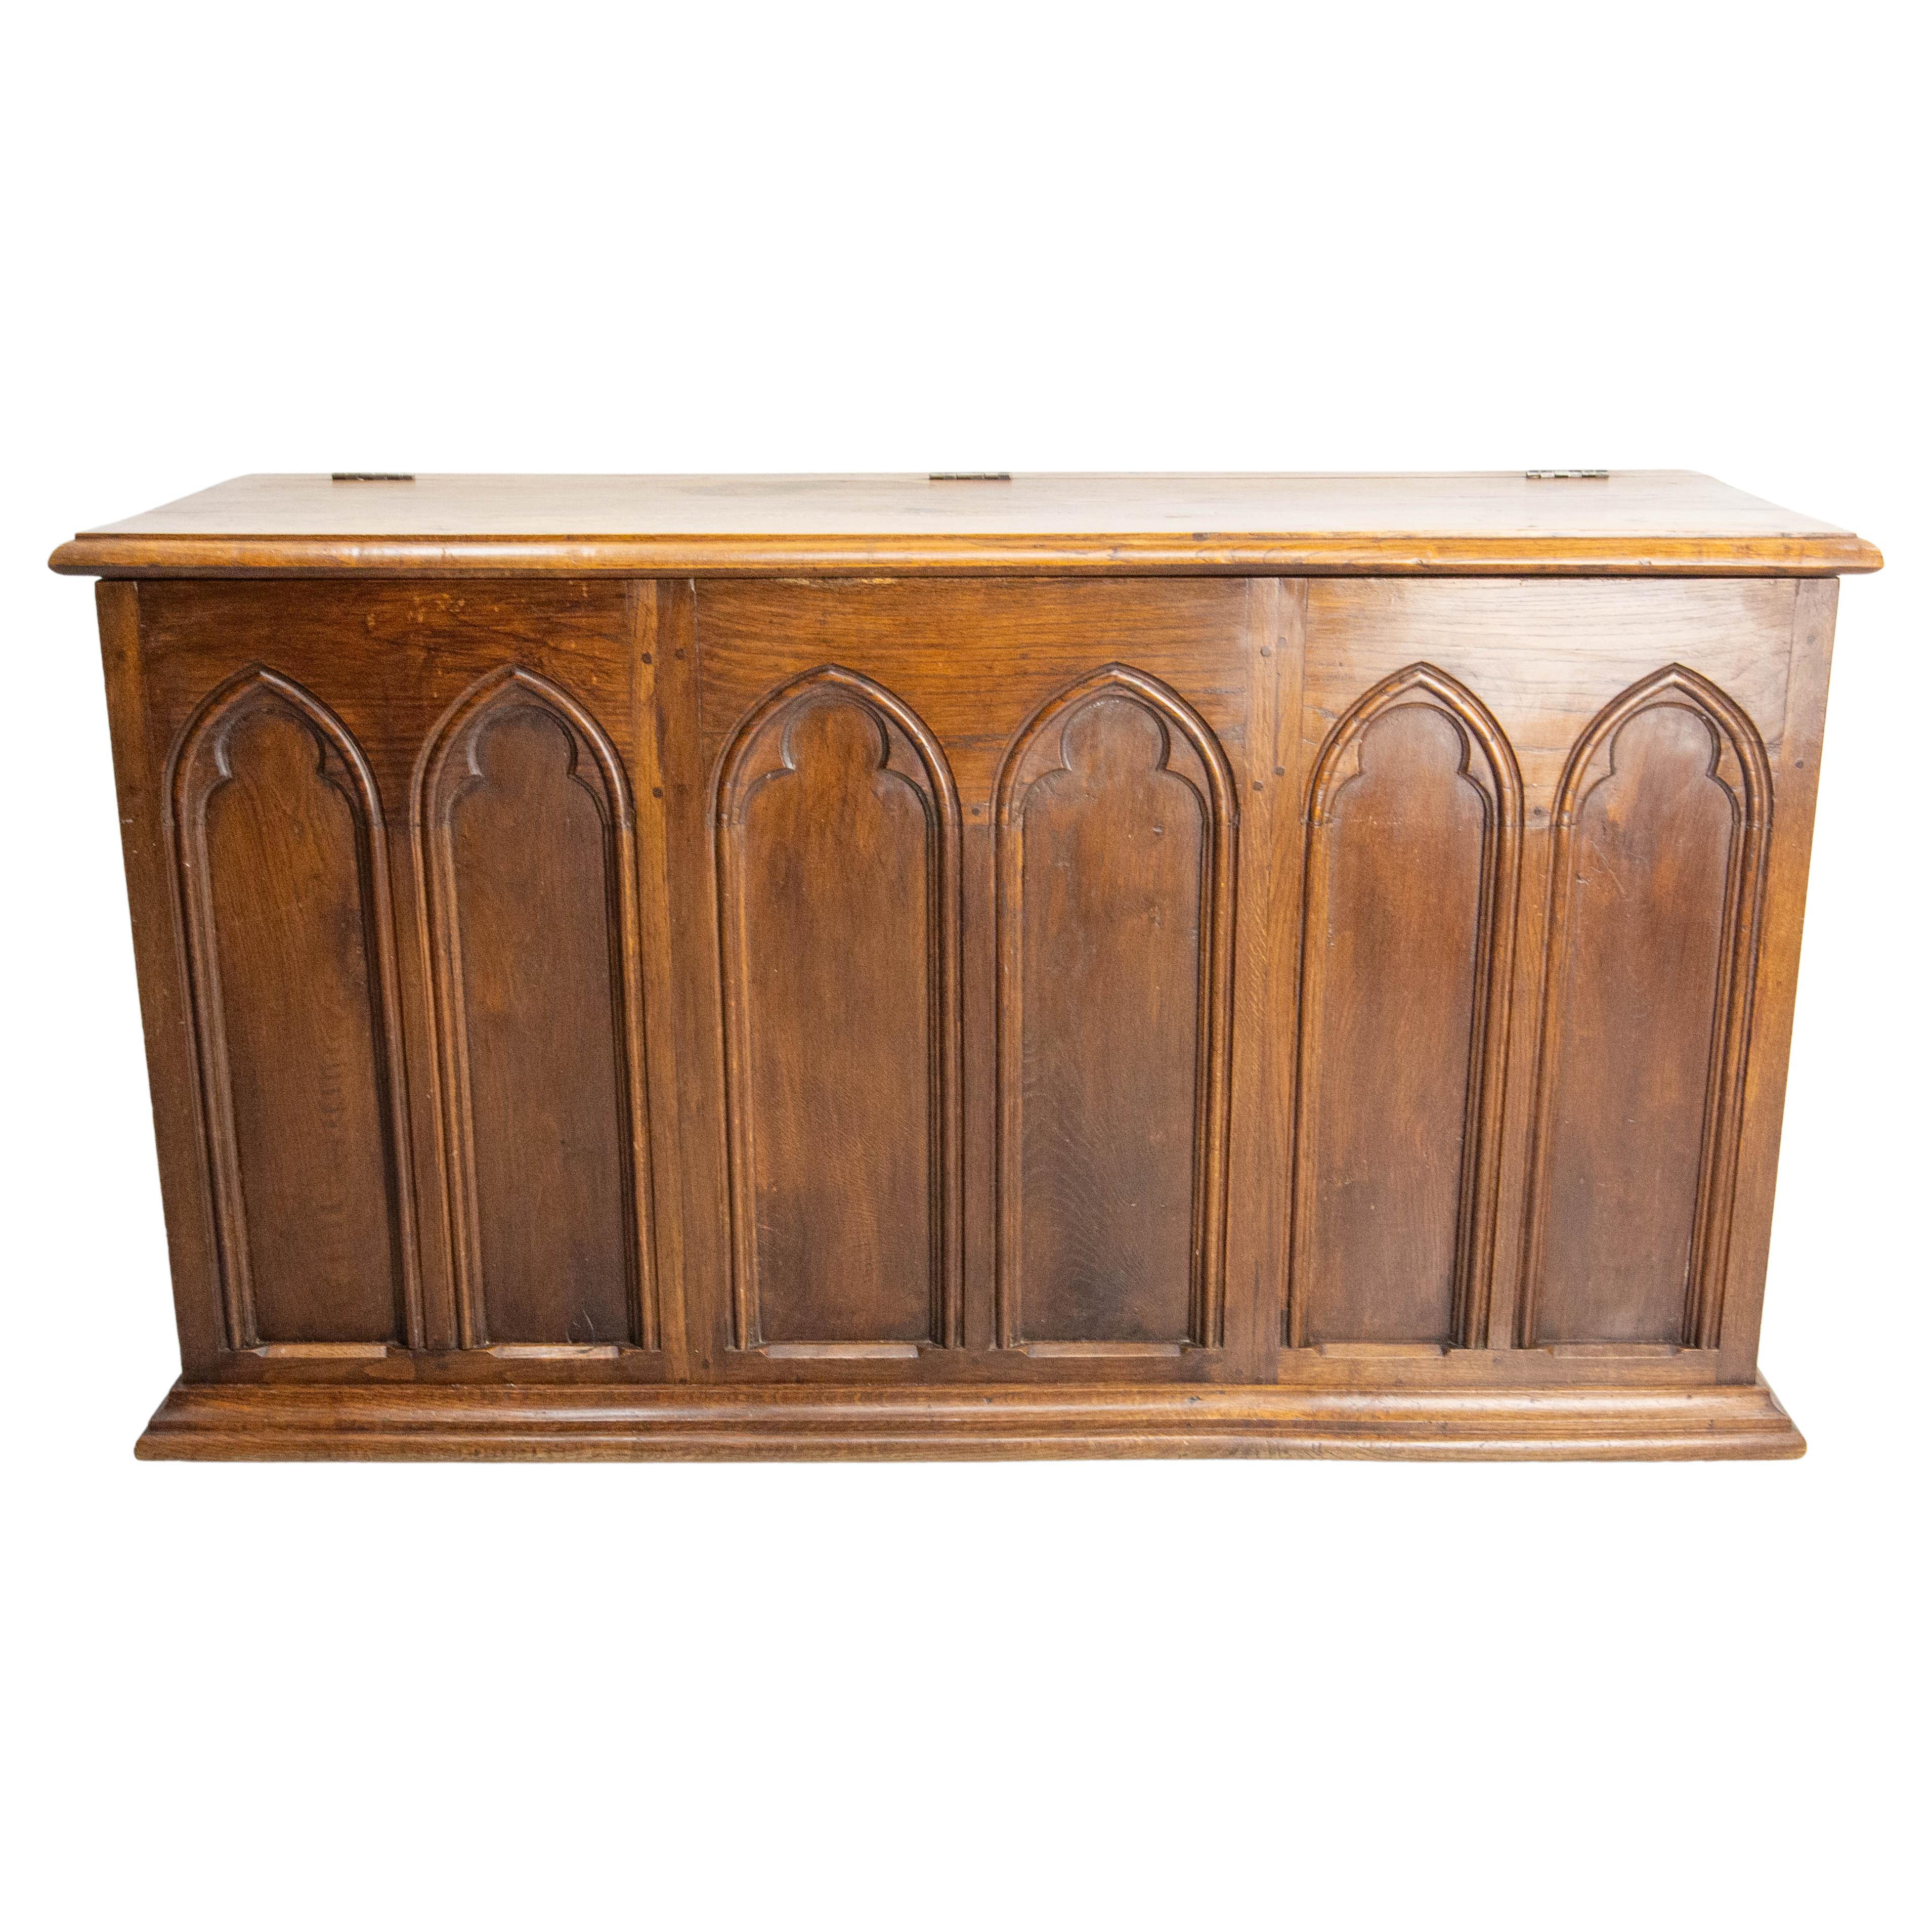 19th Century Chest or Coffer Carved Oak, French Gothic Revival Style